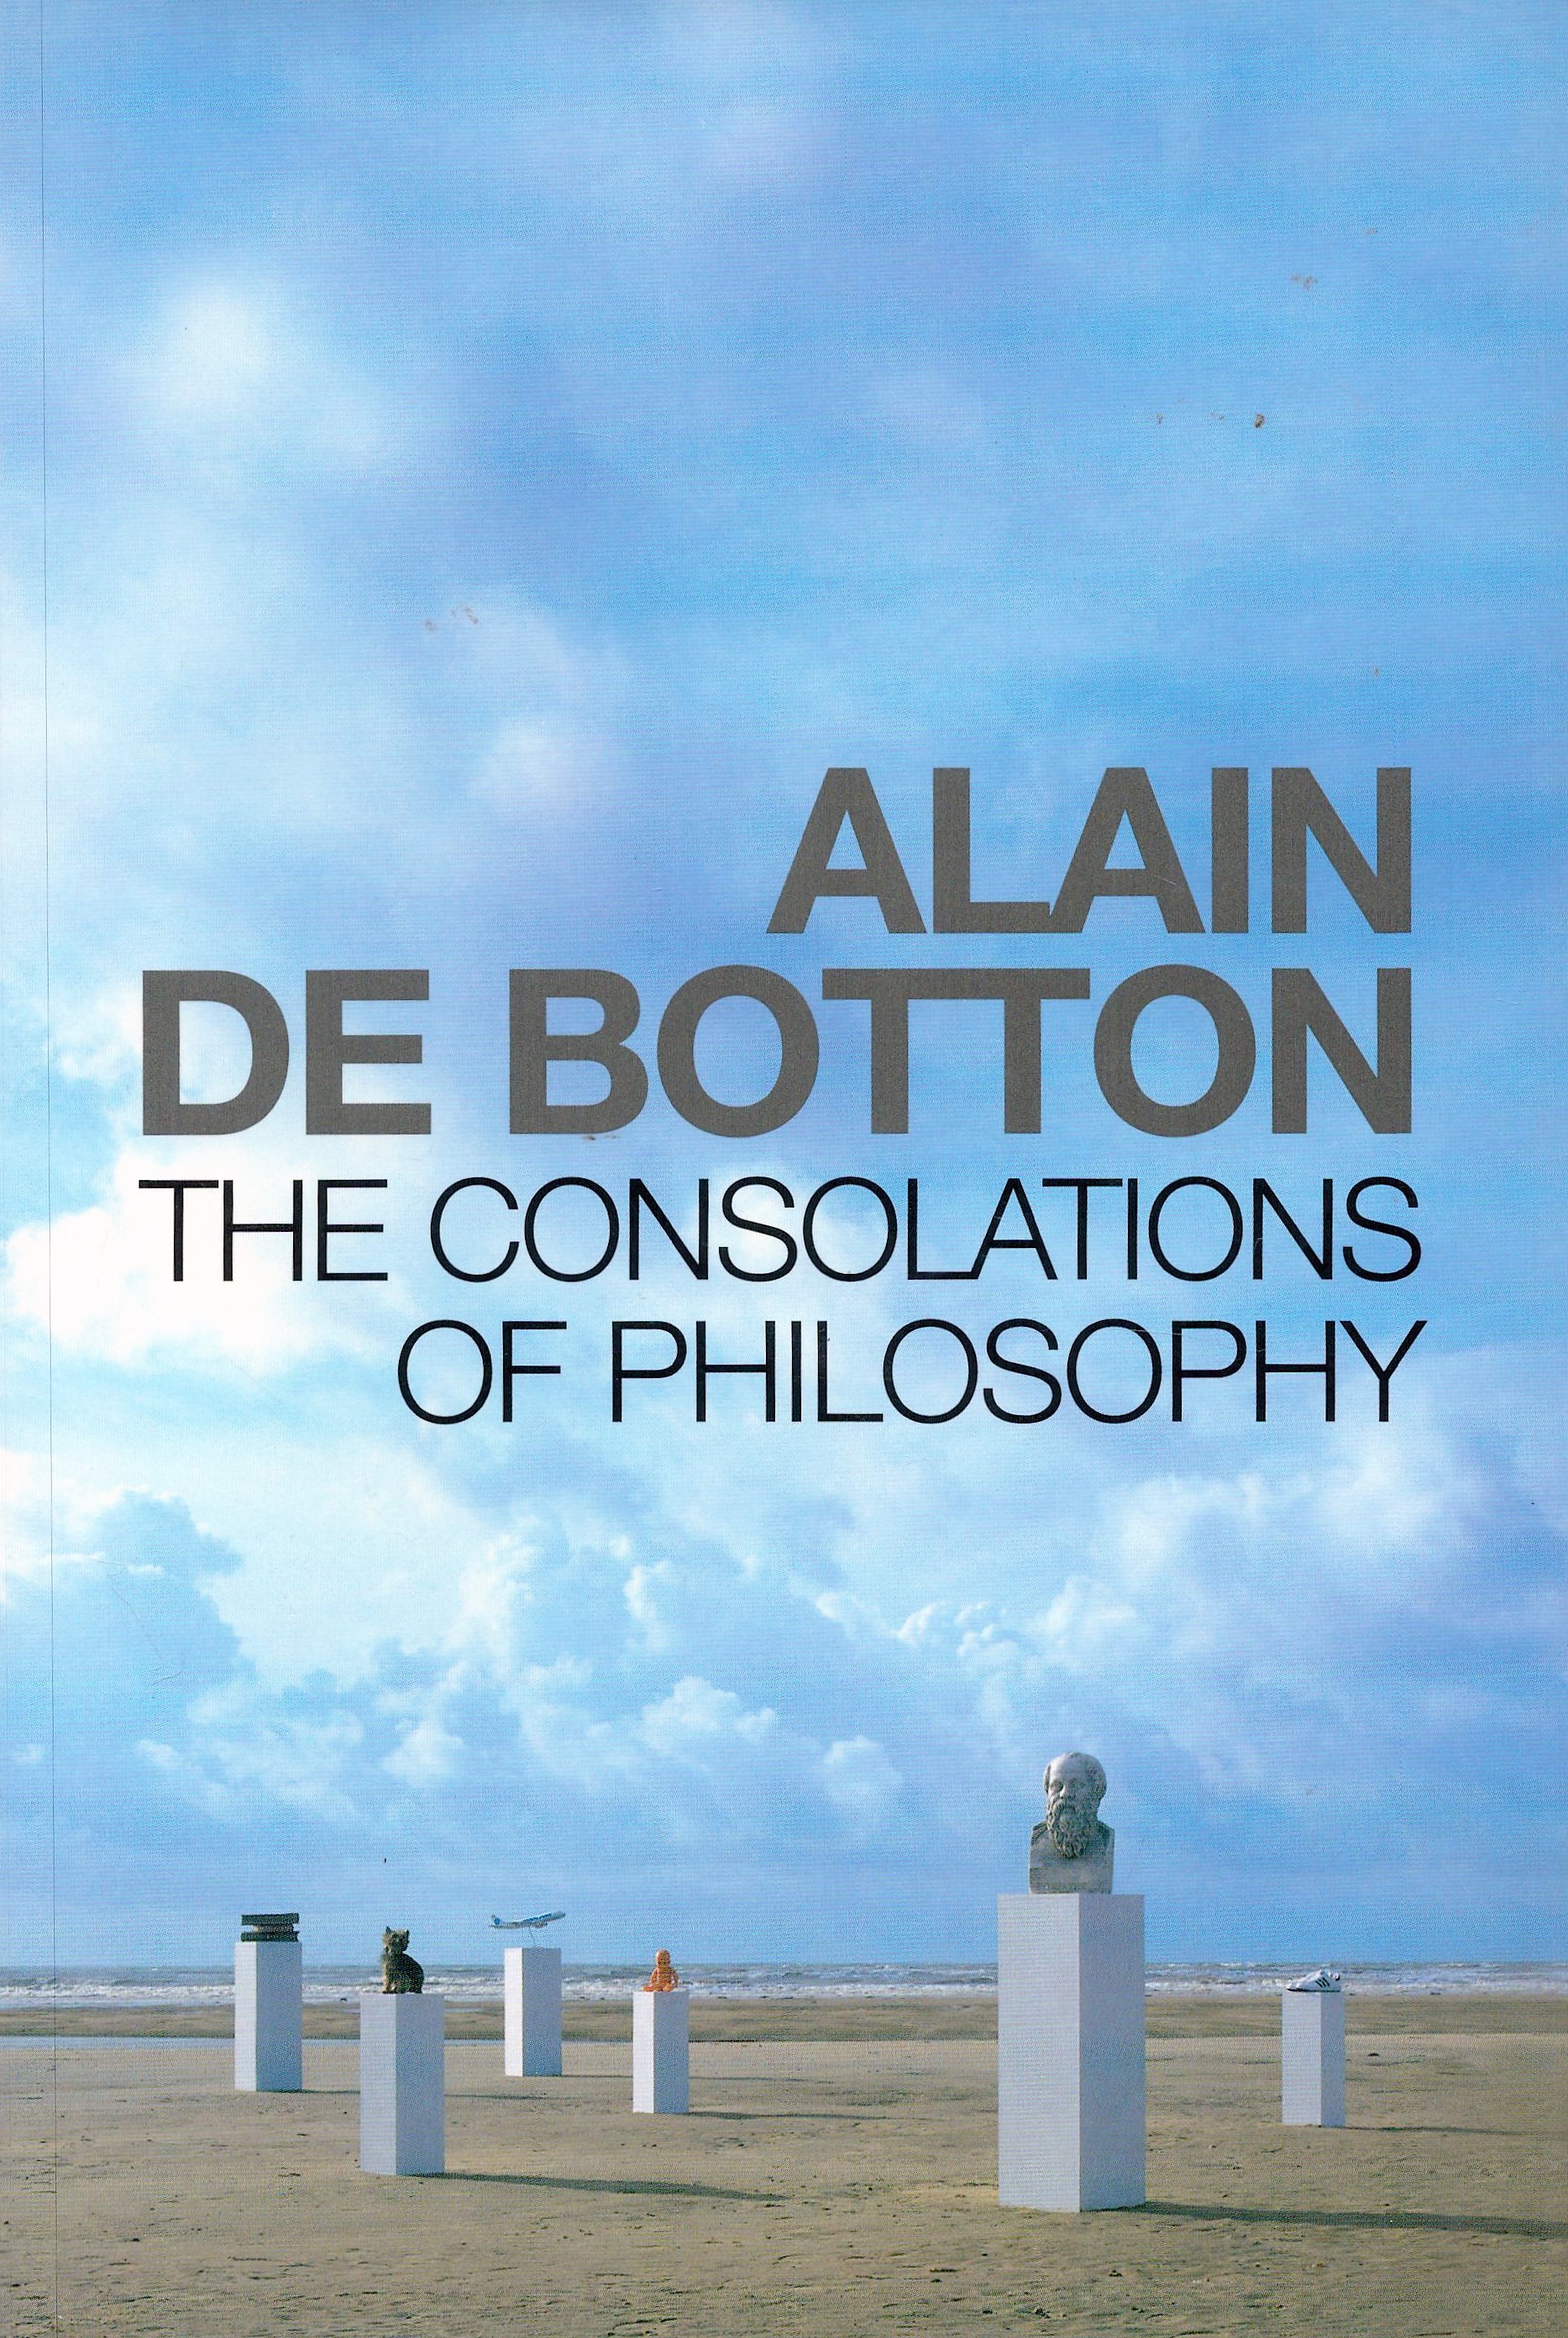 The Consolations of Philosophy by Alain De Botton Hardback Book 2000 First Edition published by